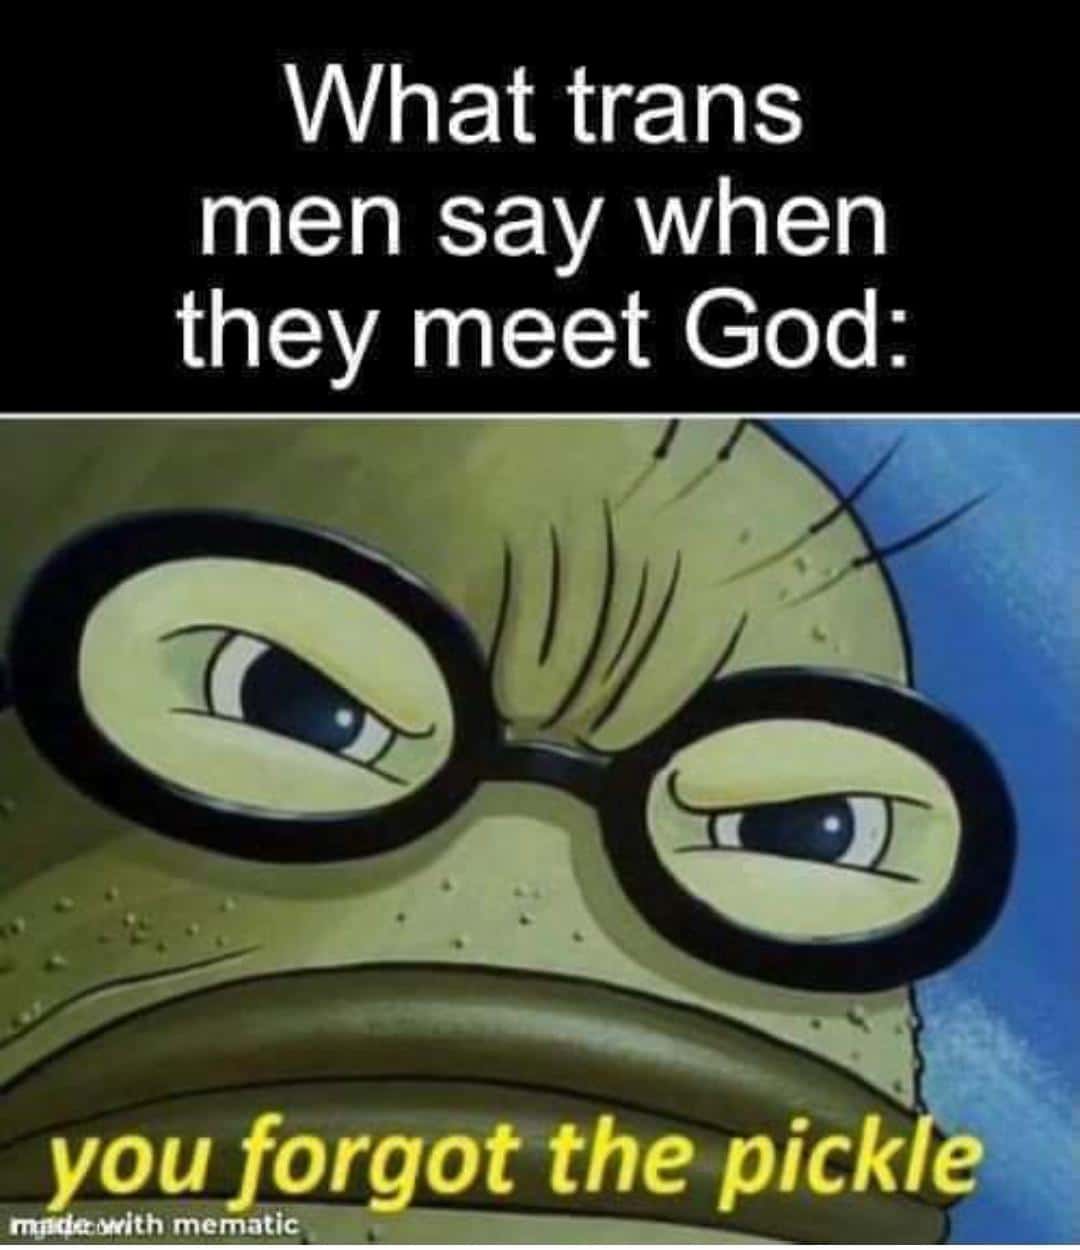 Spongebob, Trans Spongebob Memes Spongebob, Trans text: What trans men say when they meet God: youfirgot the pickie rrti*iewith mematic 